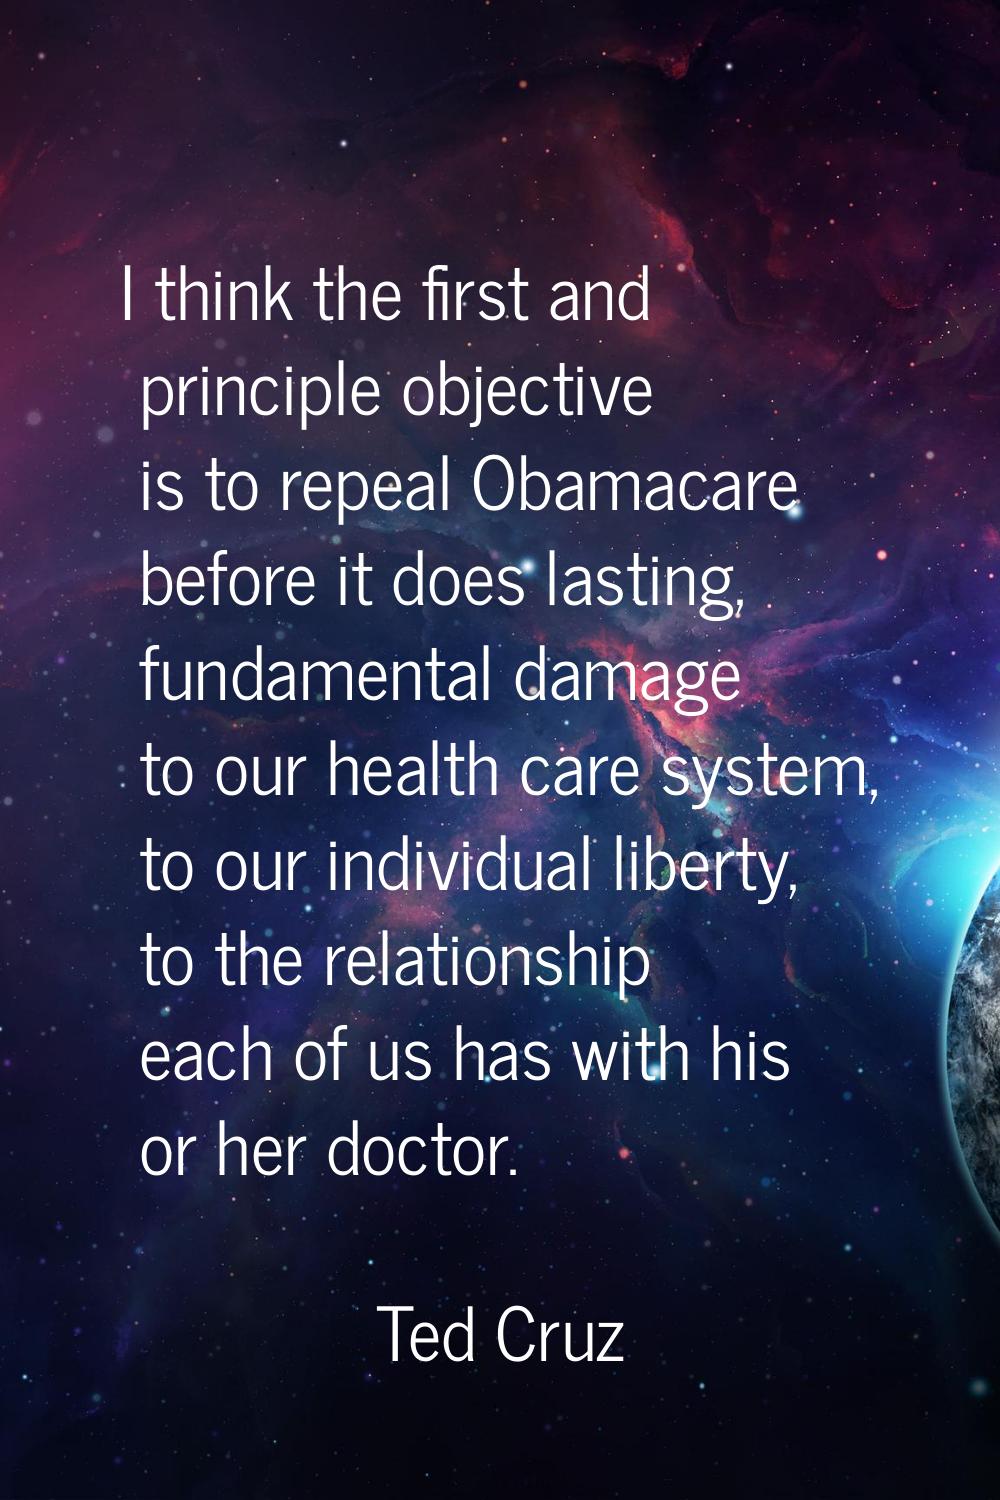 I think the first and principle objective is to repeal Obamacare before it does lasting, fundamenta